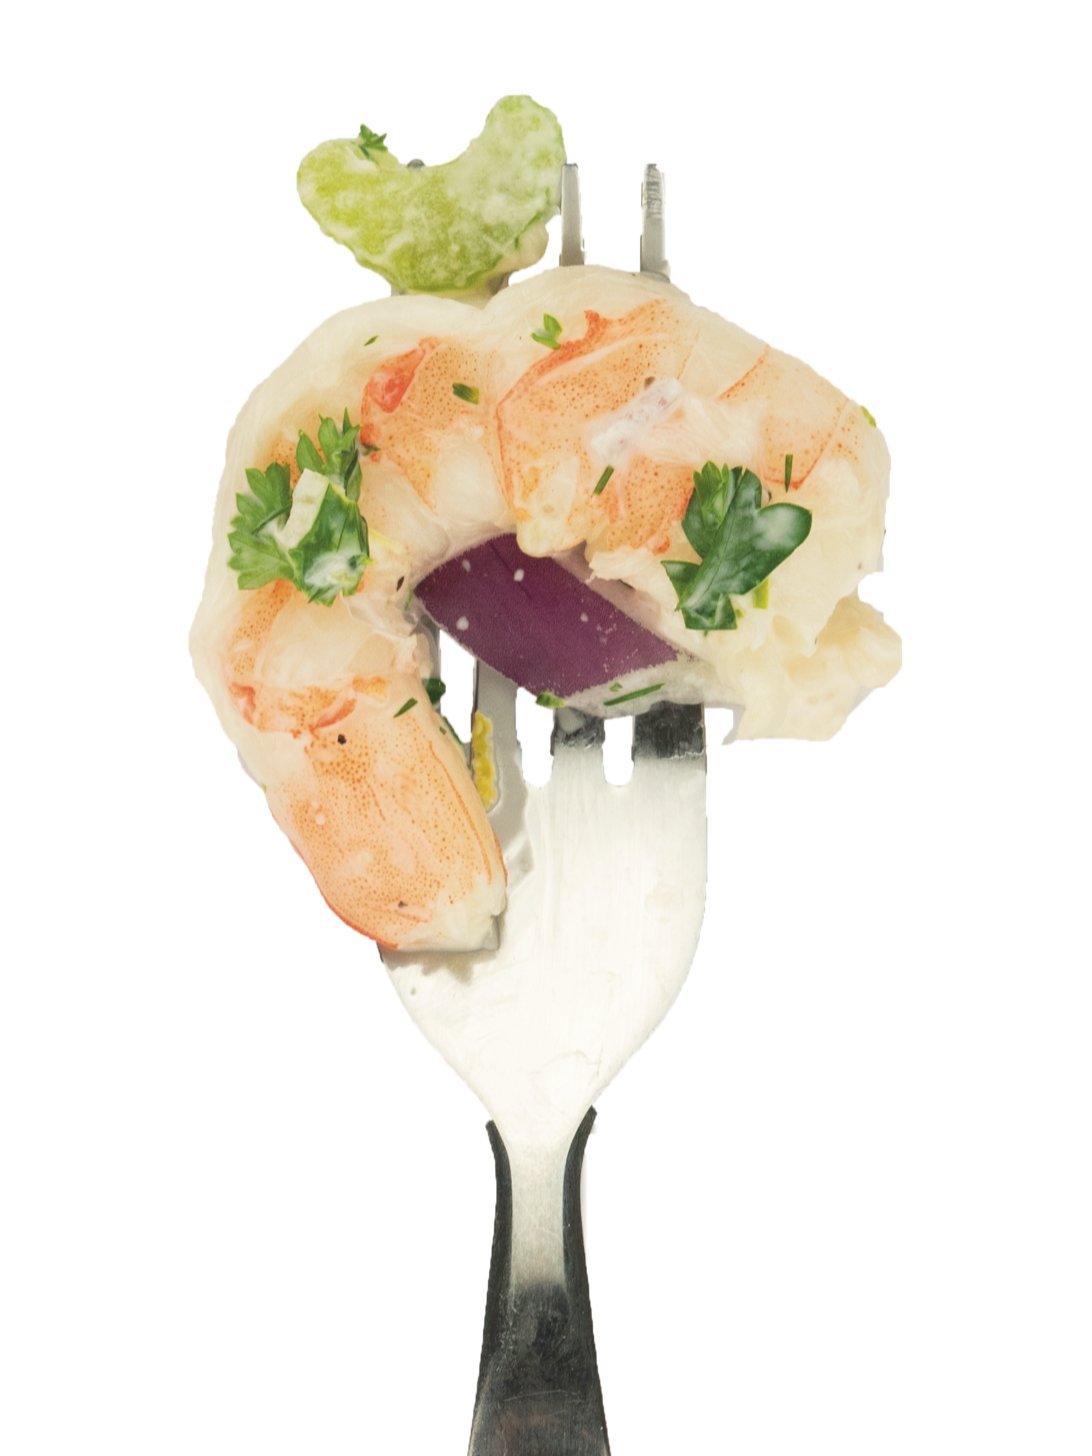 Yogurt Dill Shrimp Salad: herbed salad with red onions and celery.